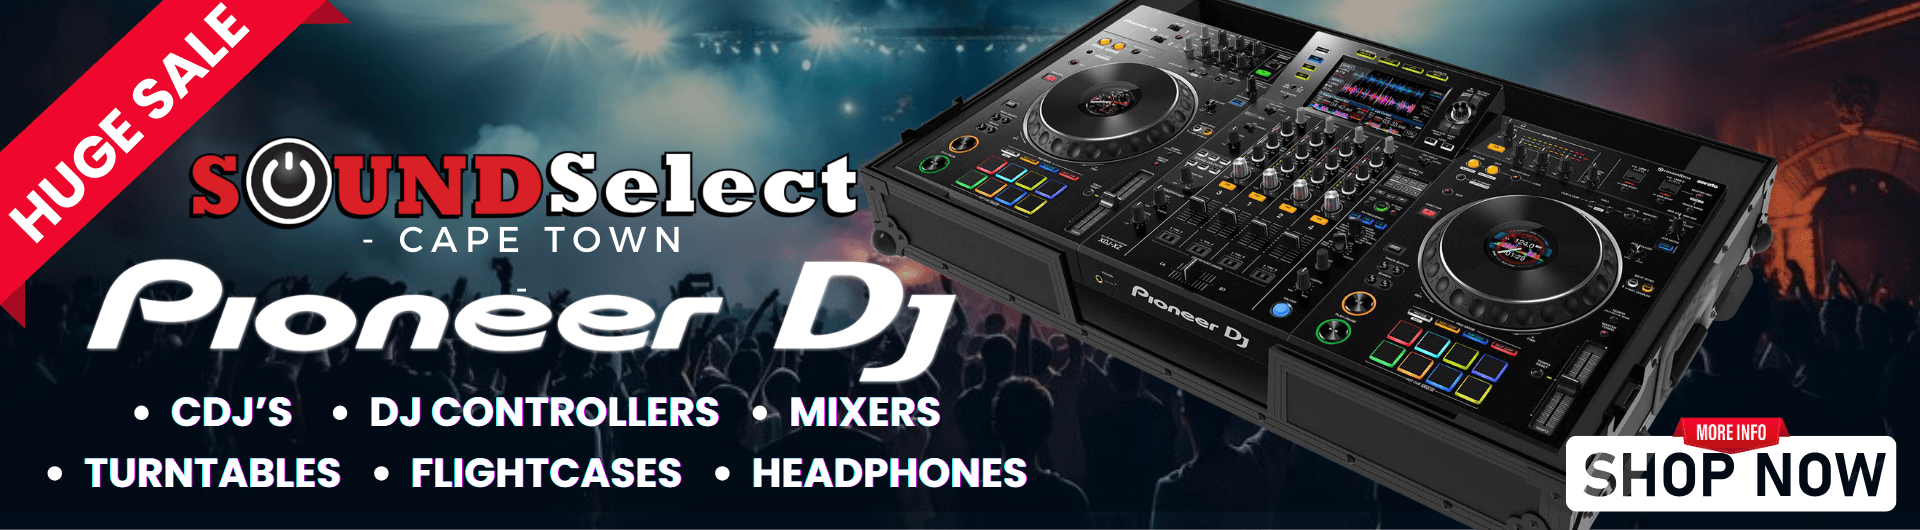 Sound_Select_Cape_Town_Pioneer_DJ_1_